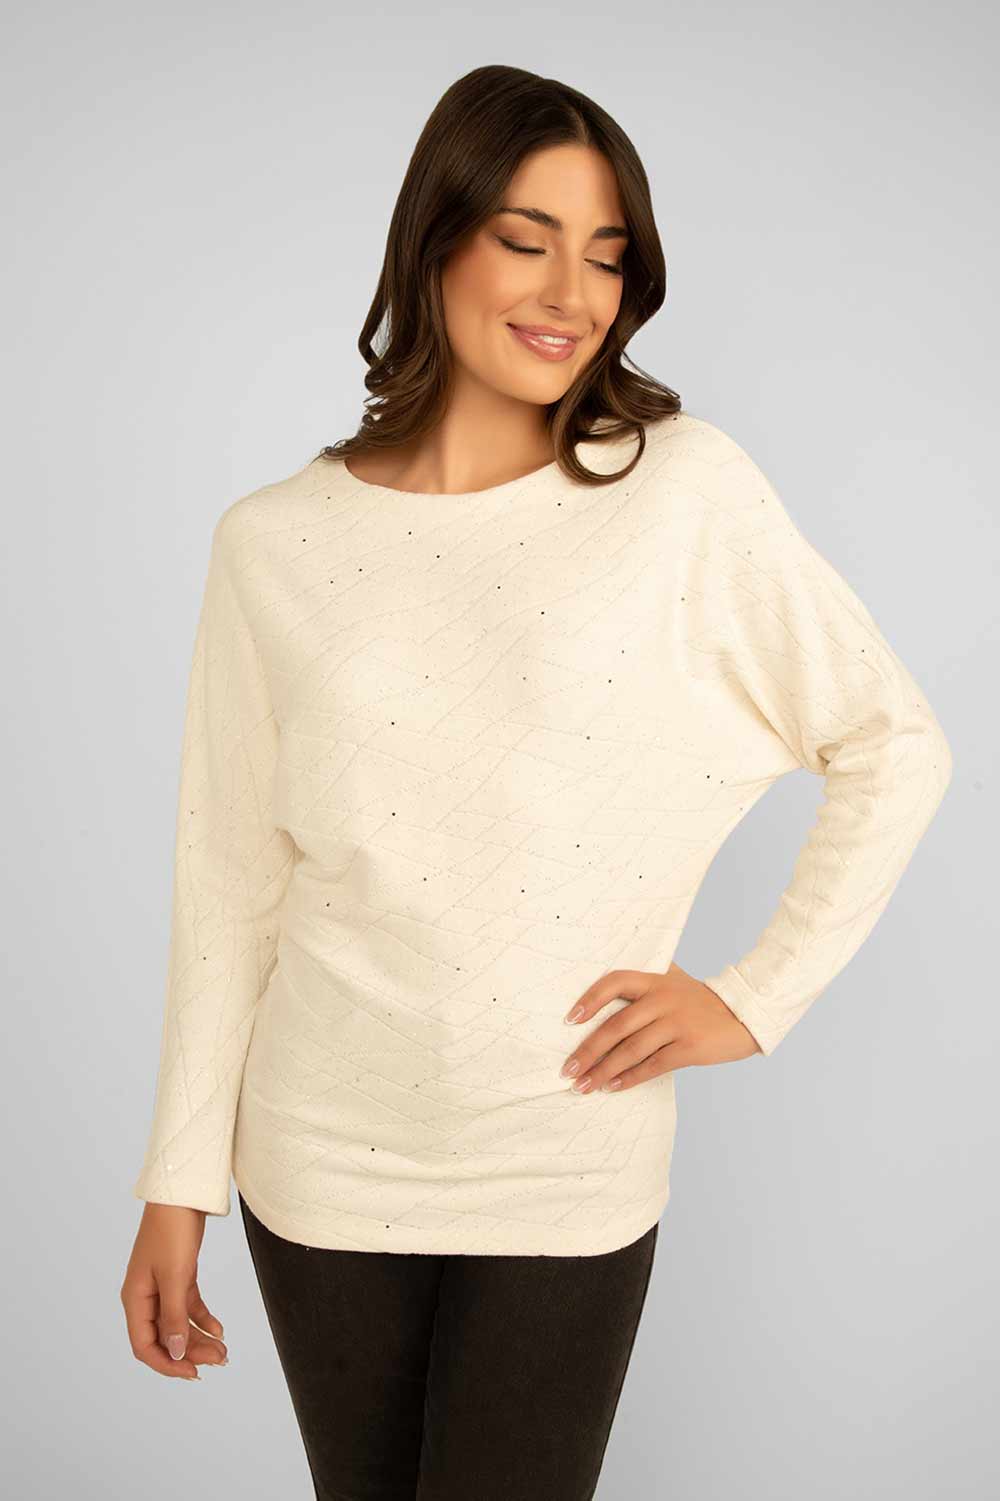 Women's Clothing FRANK LYMAN (233484) Textured Sweater in OFFWHITE